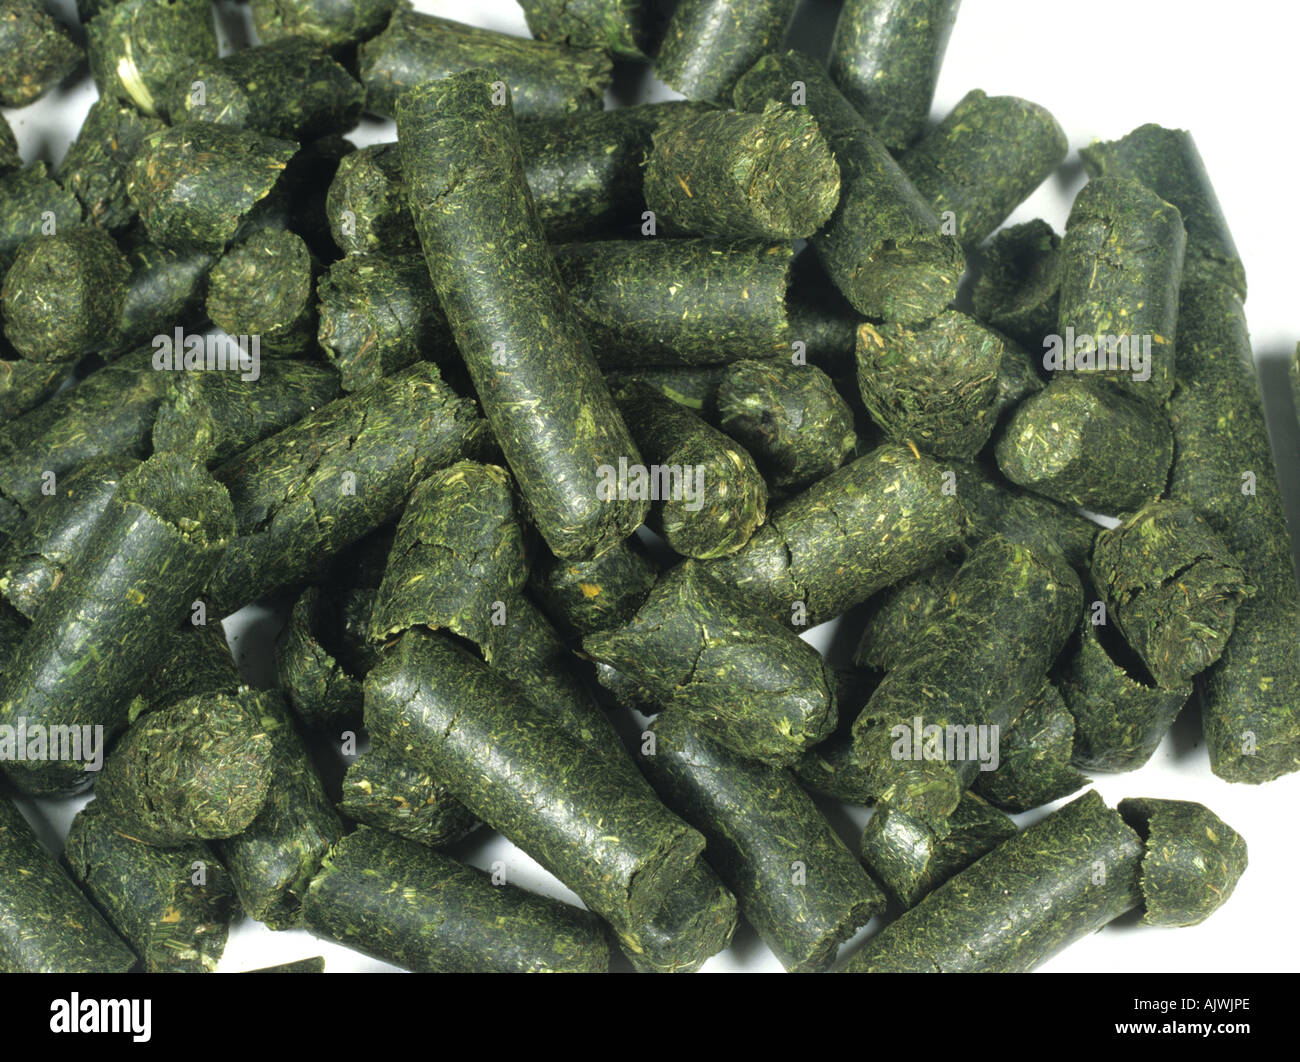 Artificially dried grass pellets used for animal feed Stock Photo